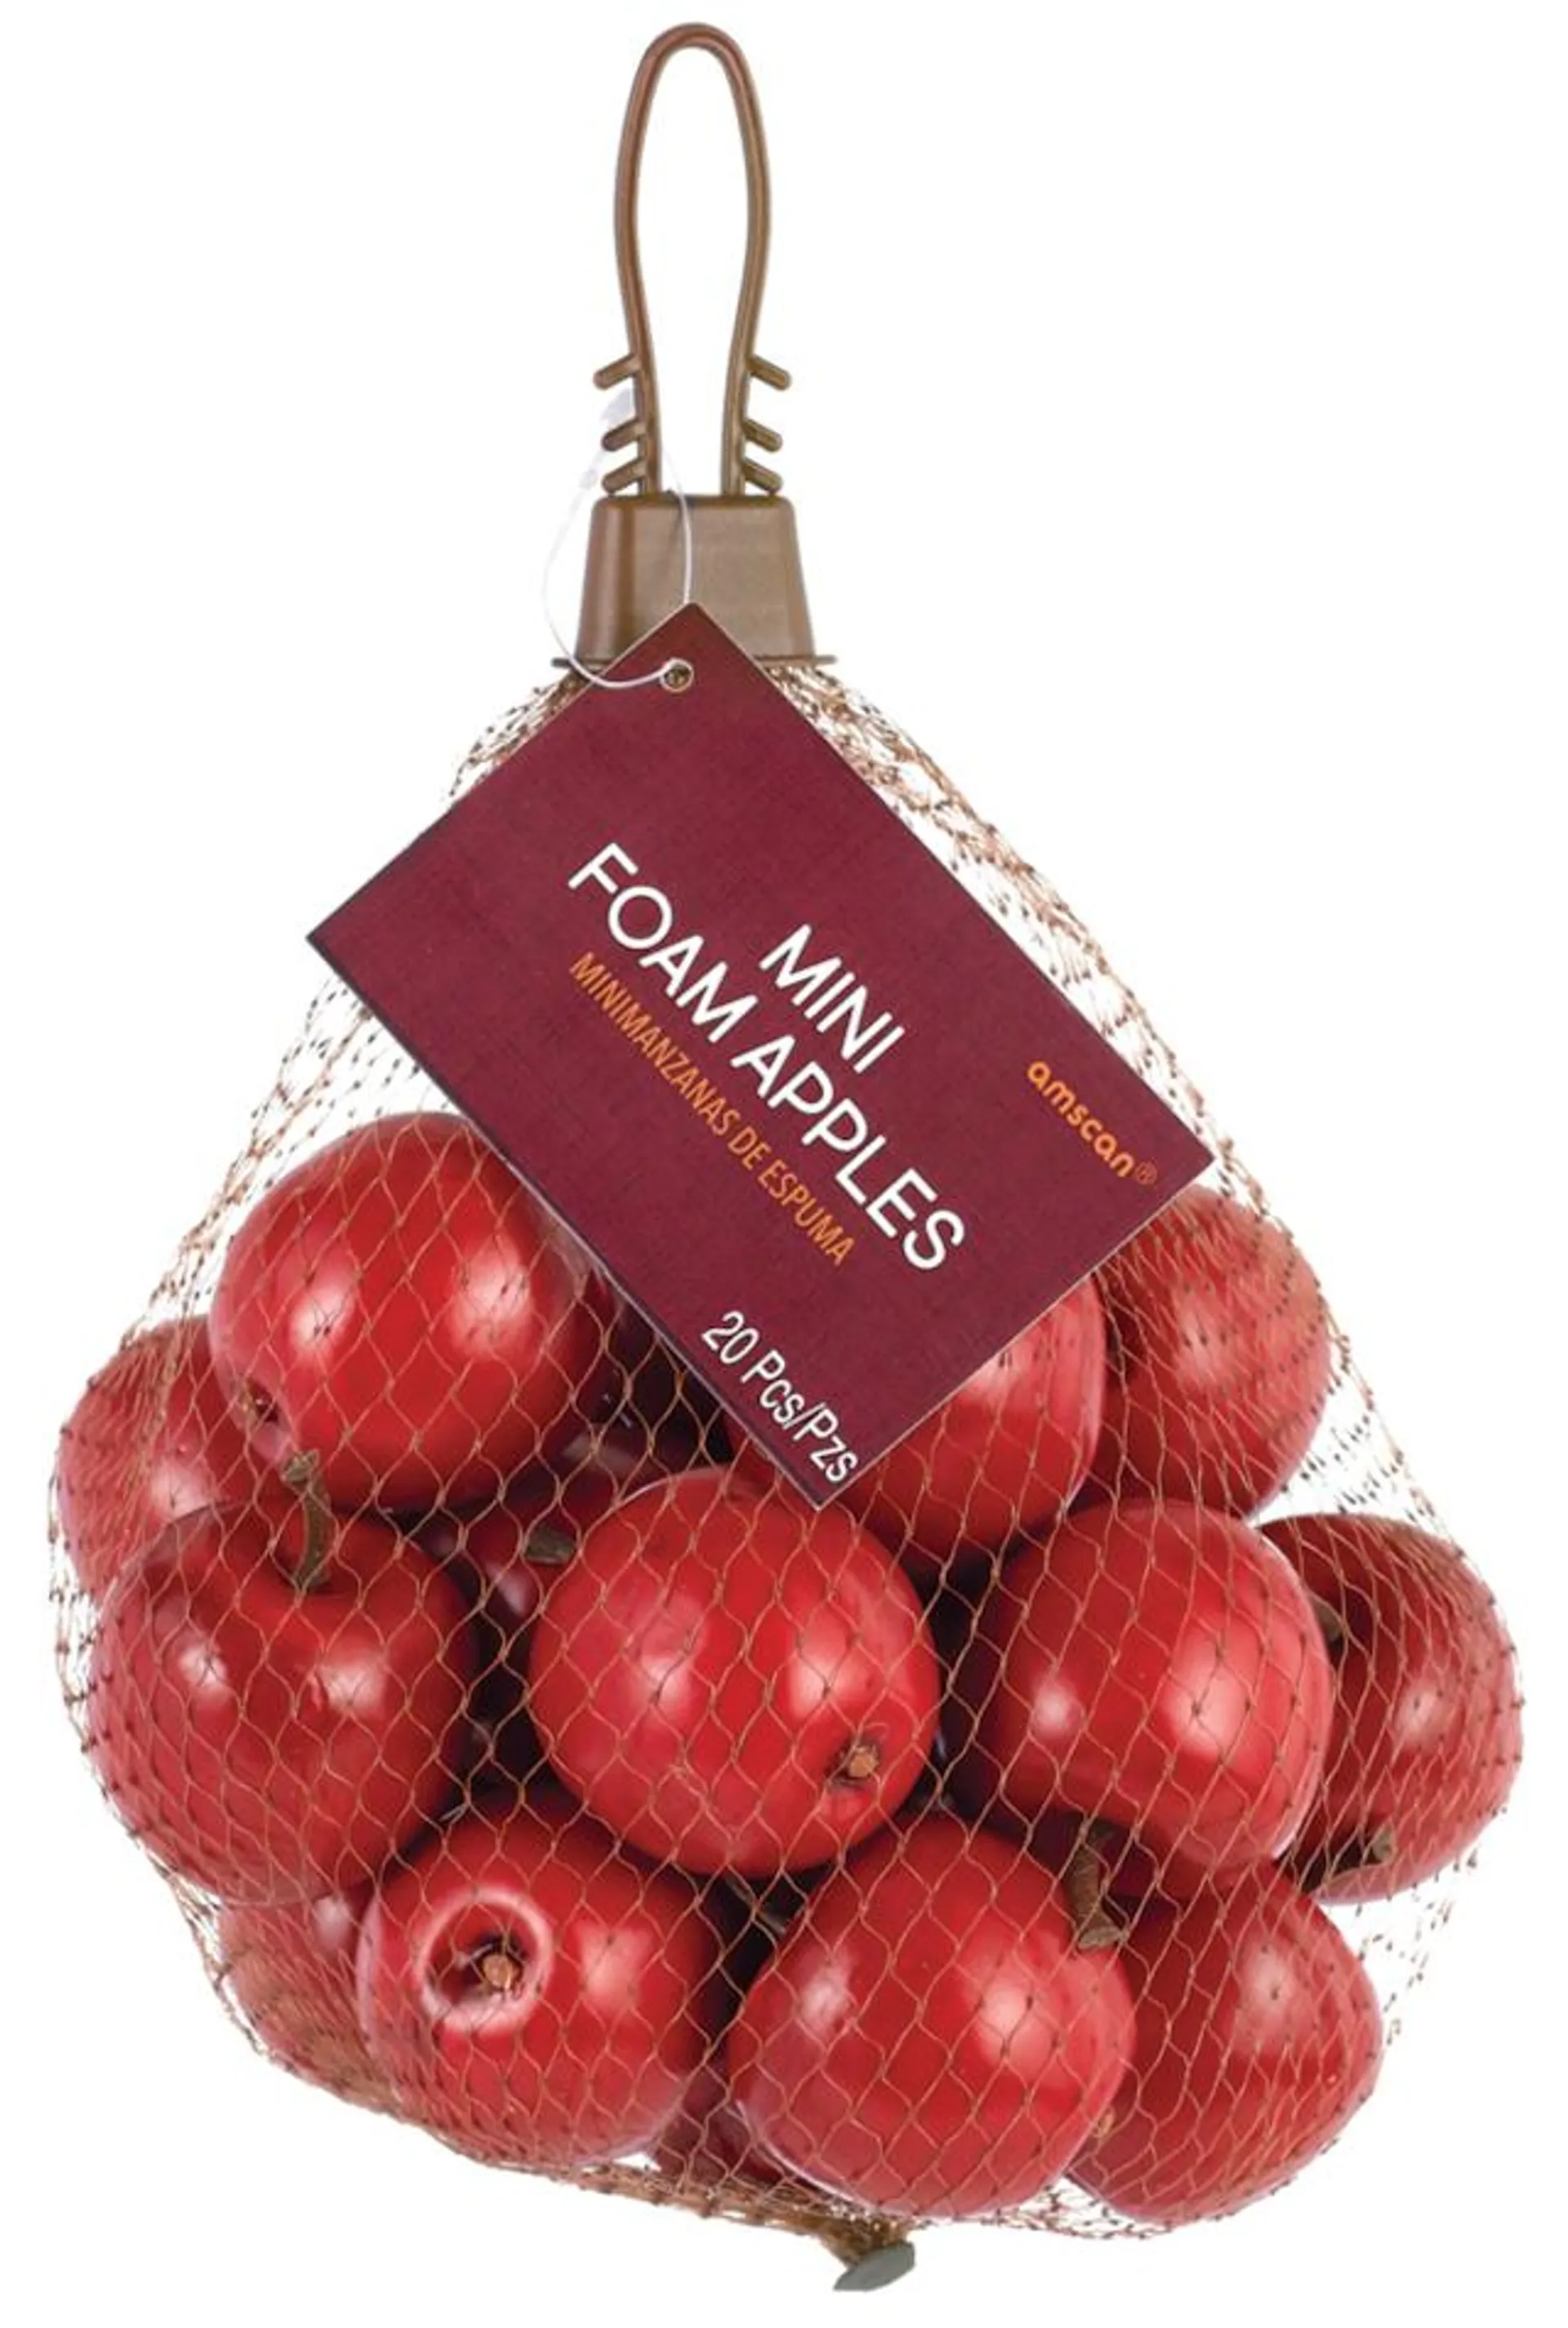 Mini Foam Apples, Red, 1.5-in, 20-pk, Indoor/Outdoor Decoration for Fall